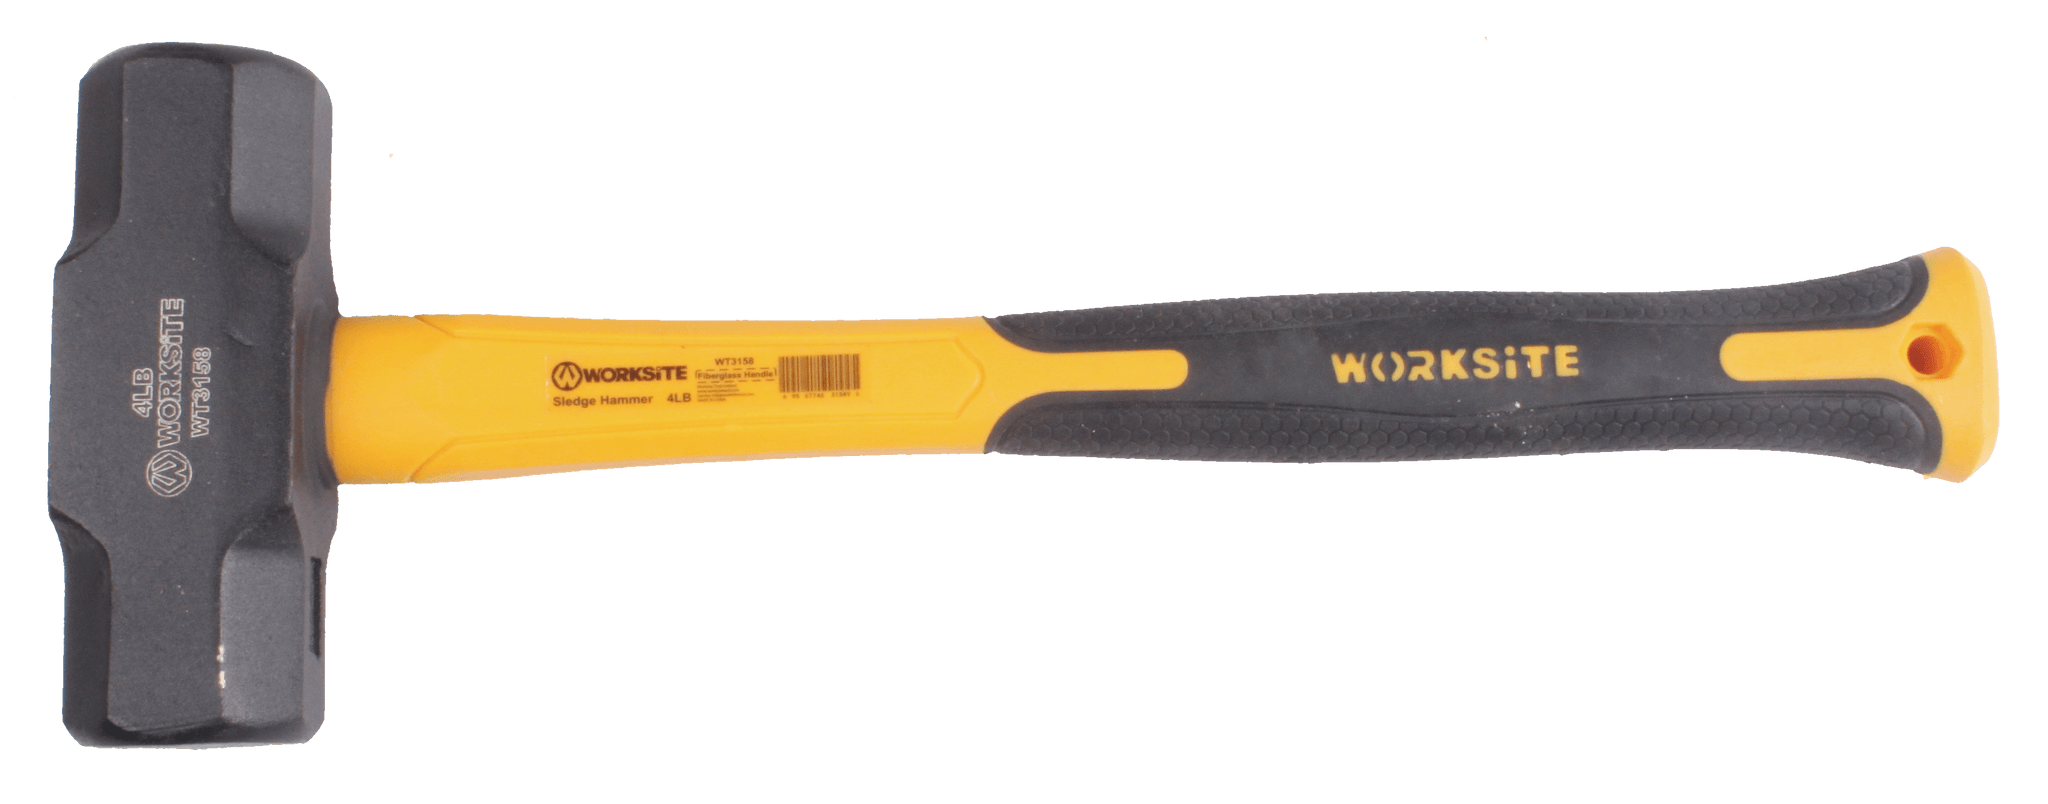 WORKSITE Sledge Hammer 4lb with Fiberglass handle, 64 oz, sure strike steel, engineer hammer, designed for striking cold chisels, brick chisels, punches, Star drills, spikes & hardened nails, blue painted, forged & tempered steel head -  WT3158